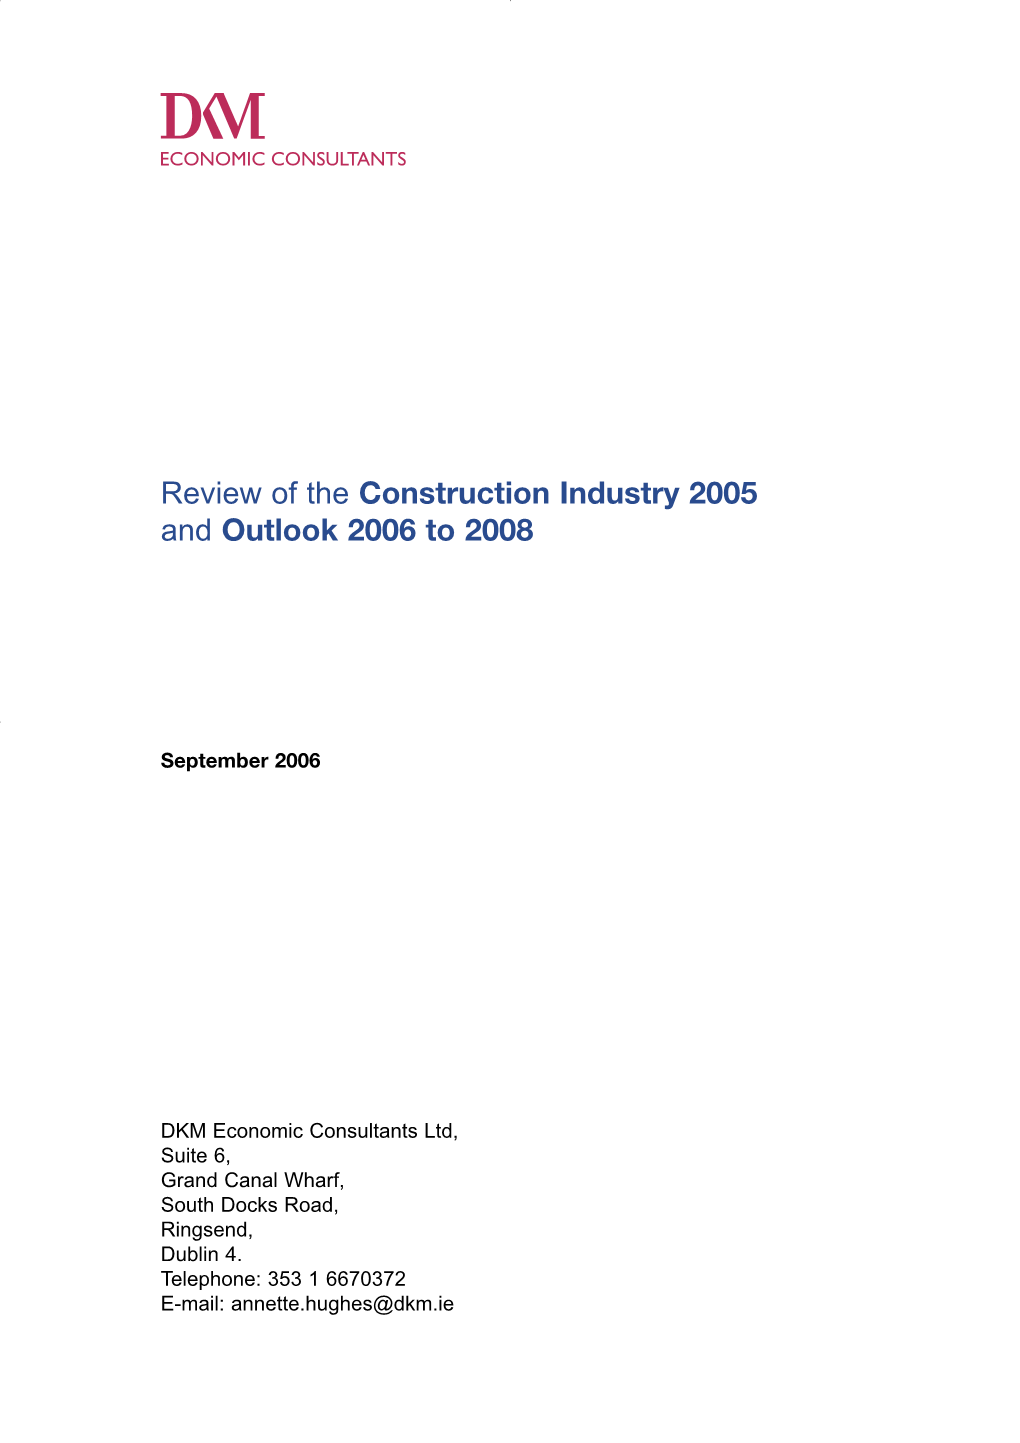 Review of the Construction Industry 2005 and Outlook 2006 to 2008